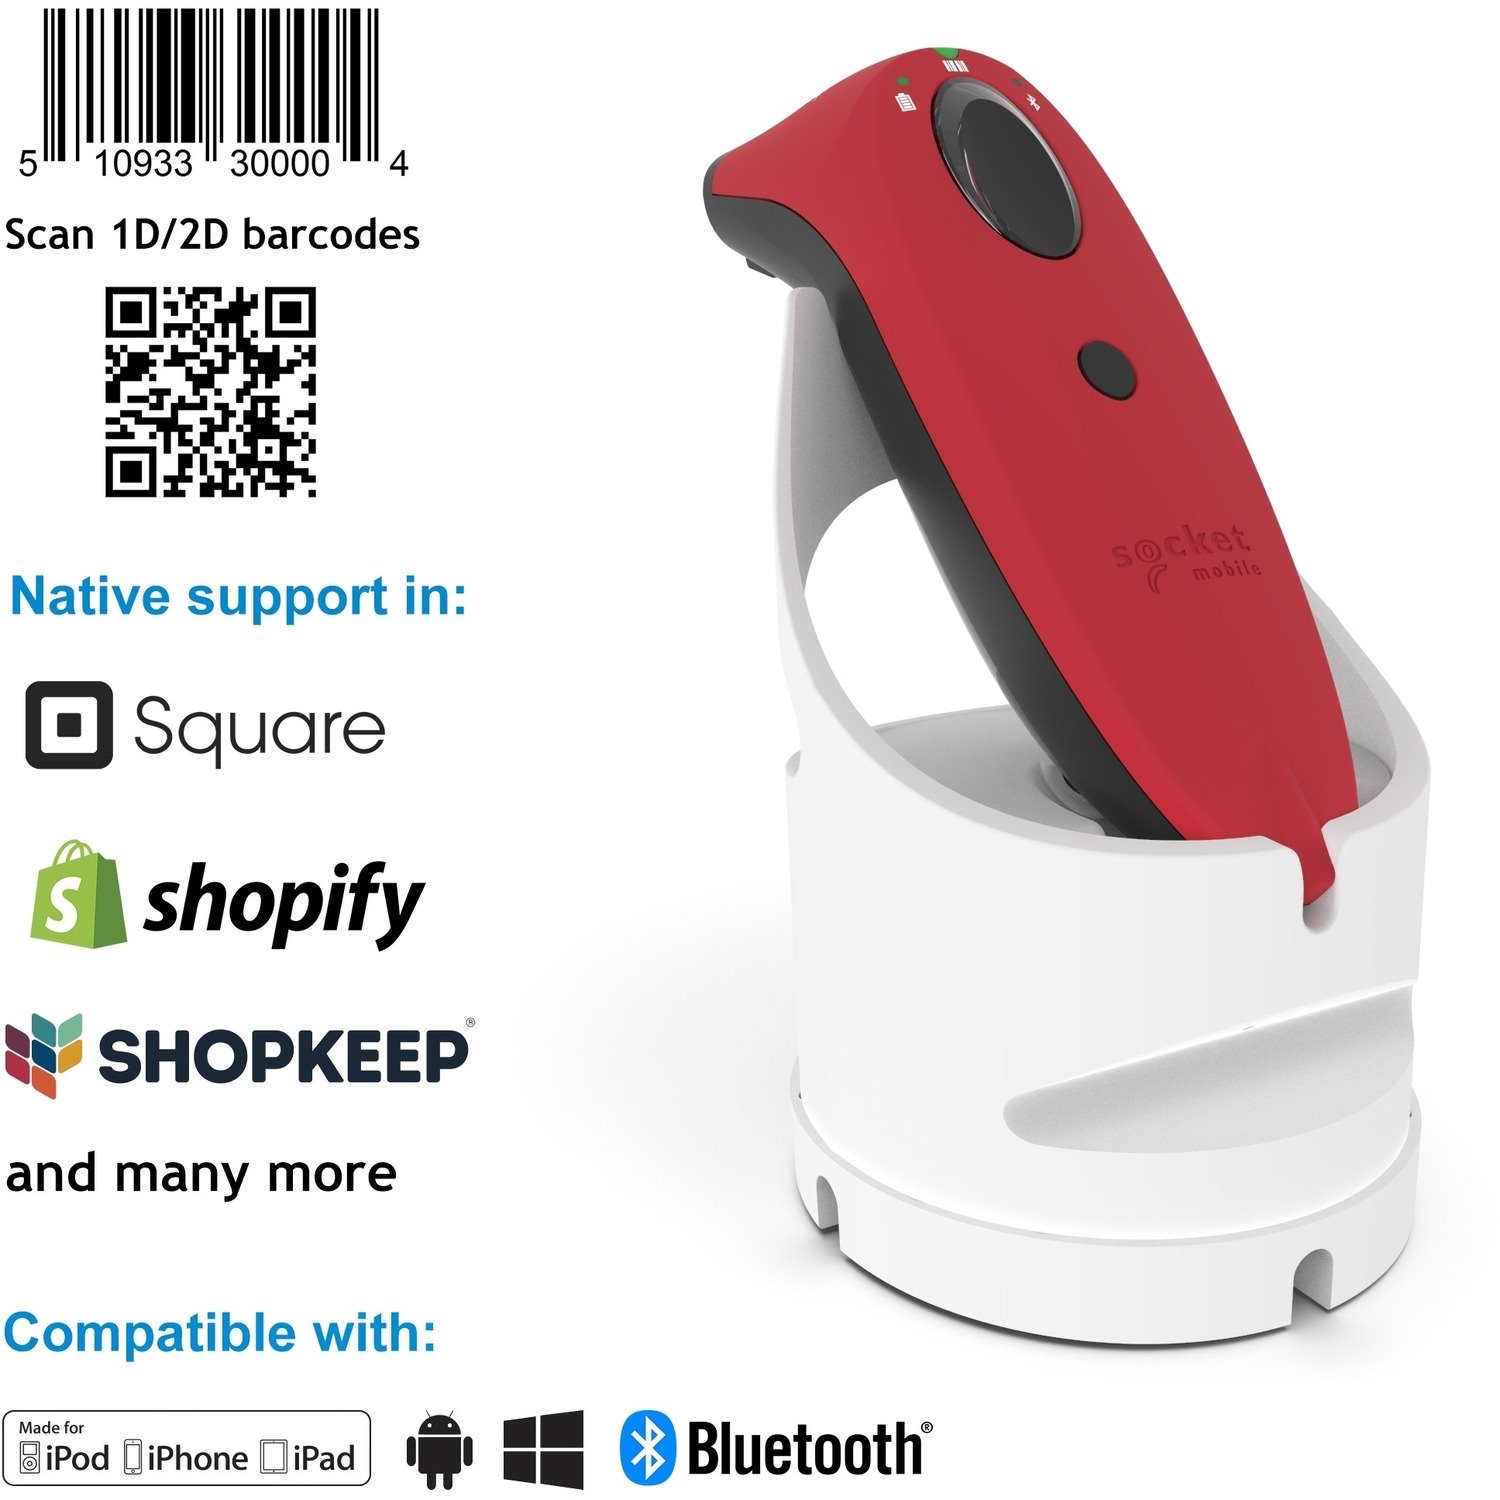 Socket Mobile SocketScan S740 Handheld Barcode Scanner - Wireless Connectivity - Red, White